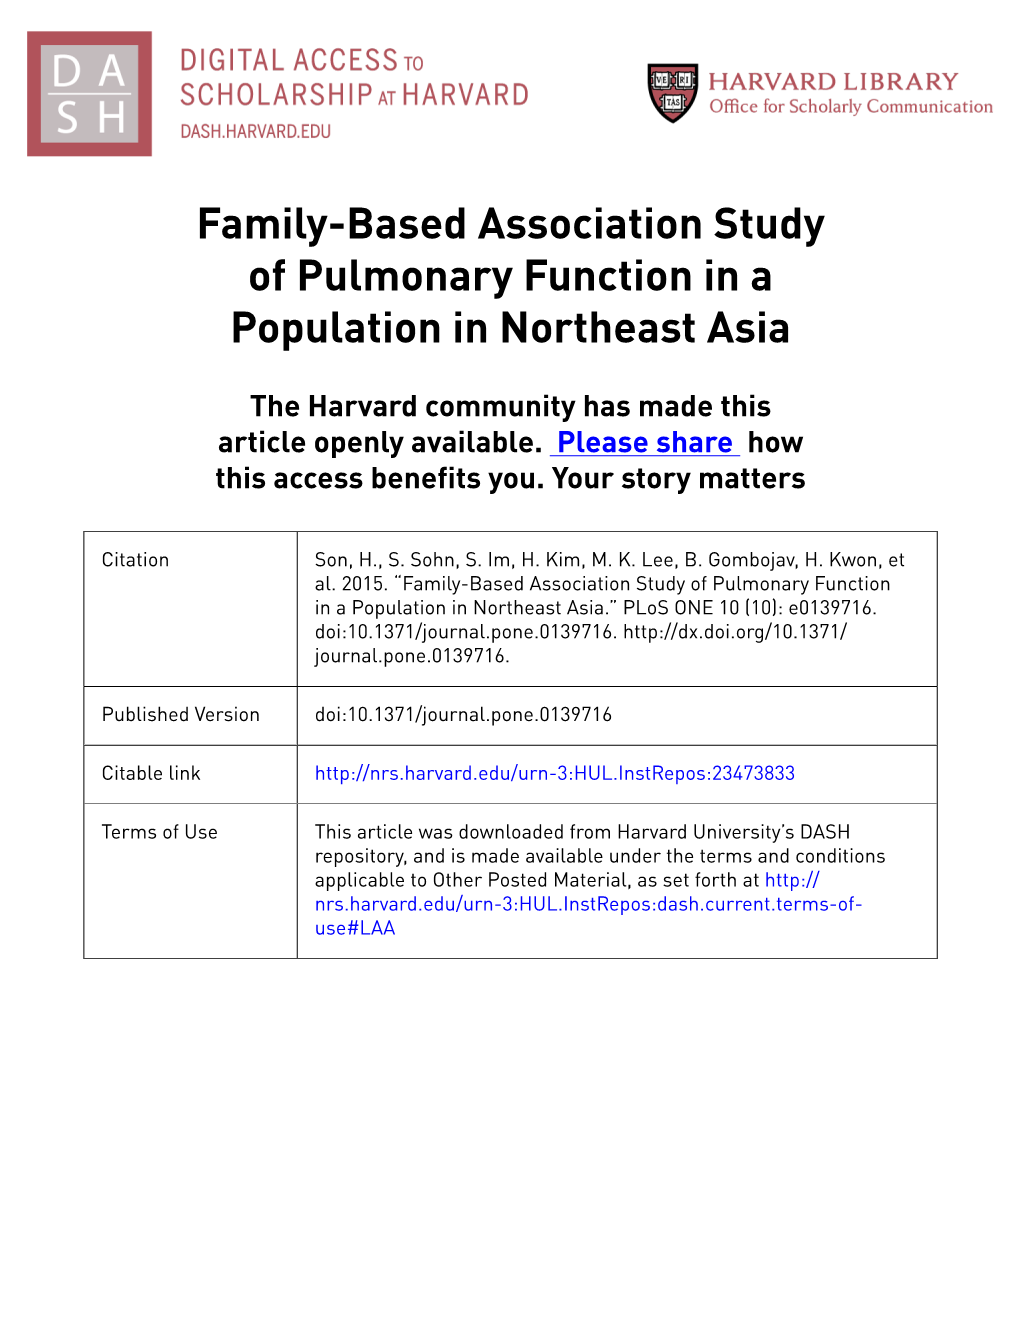 Family-Based Association Study of Pulmonary Function in a Population in Northeast Asia